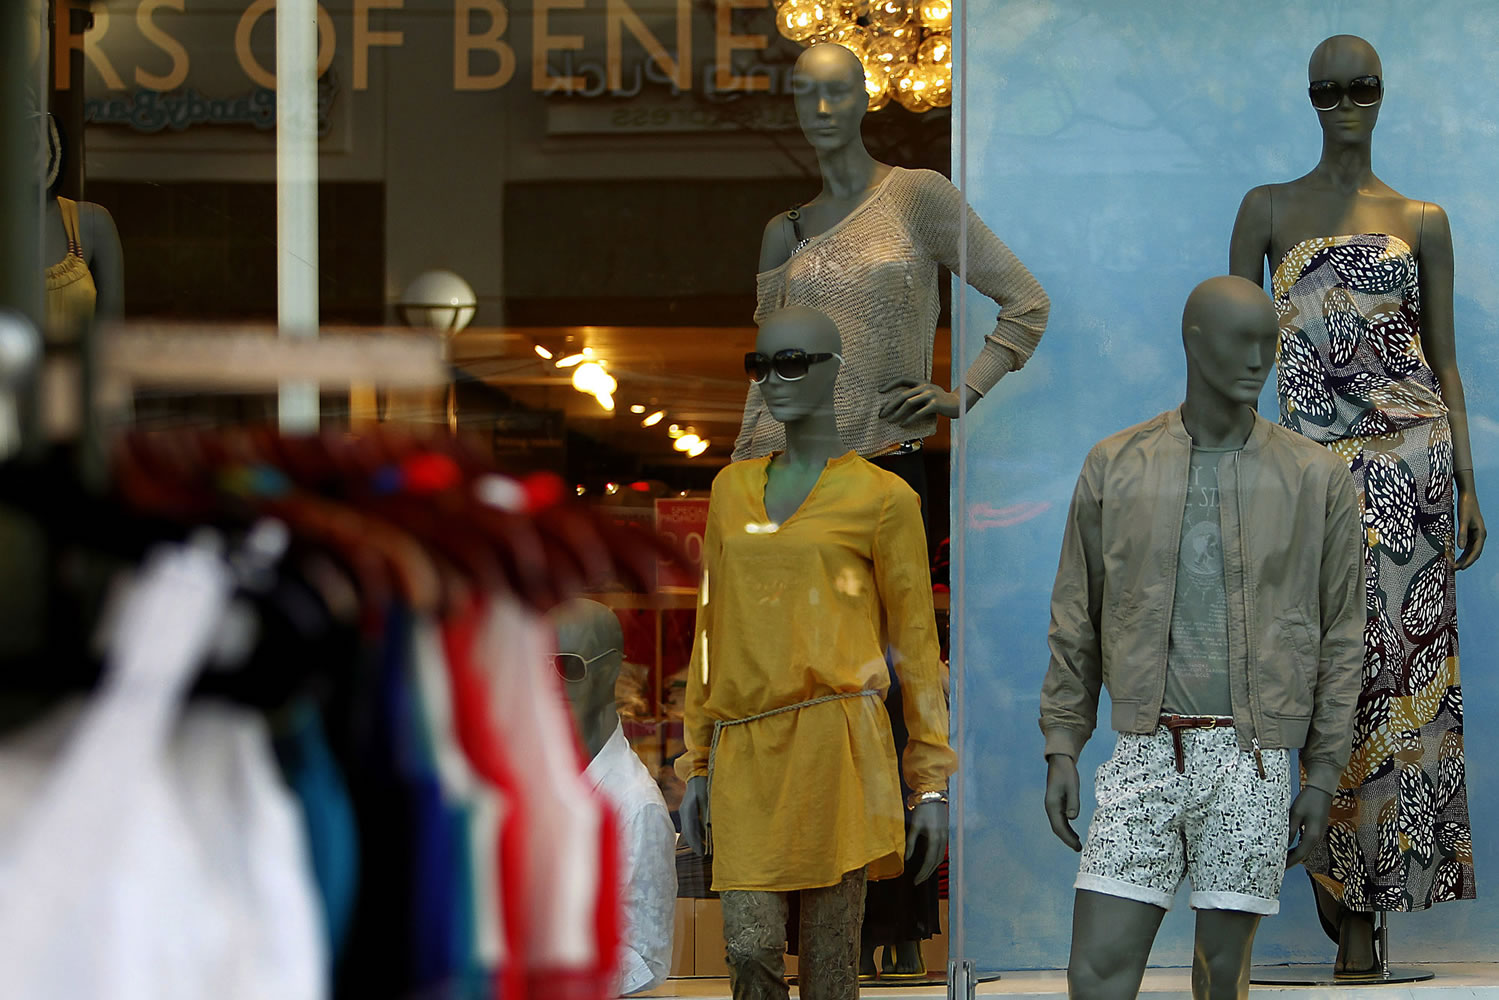 Benetton is among retailers introducing the EyeSee mannequin to glean data on customers, much as online merchants are able to do.